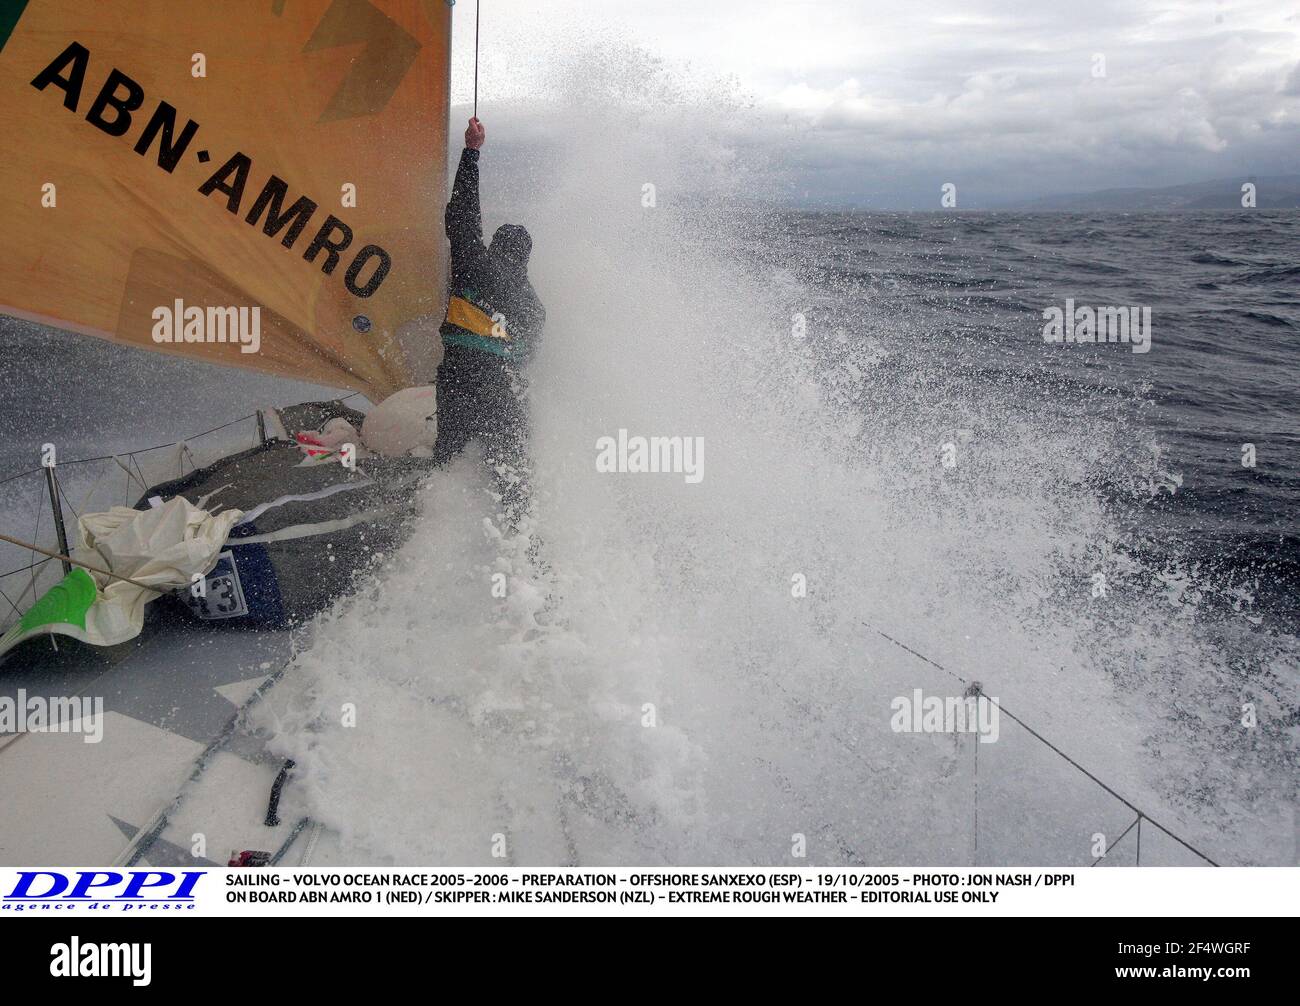 SAILING - VOLVO OCEAN RACE 2005-2006 - PREPARATION - OFFSHORE SANXEXO (ESP) - 19/10/2005 - PHOTO : JON NASH / DPPI ON BOARD ABN AMRO 1 (NED) / SKIPPER : MIKE SANDERSON (NZL) - EXTREME ROUGH WEATHER - EDITORIAL USE ONLY Stock Photo